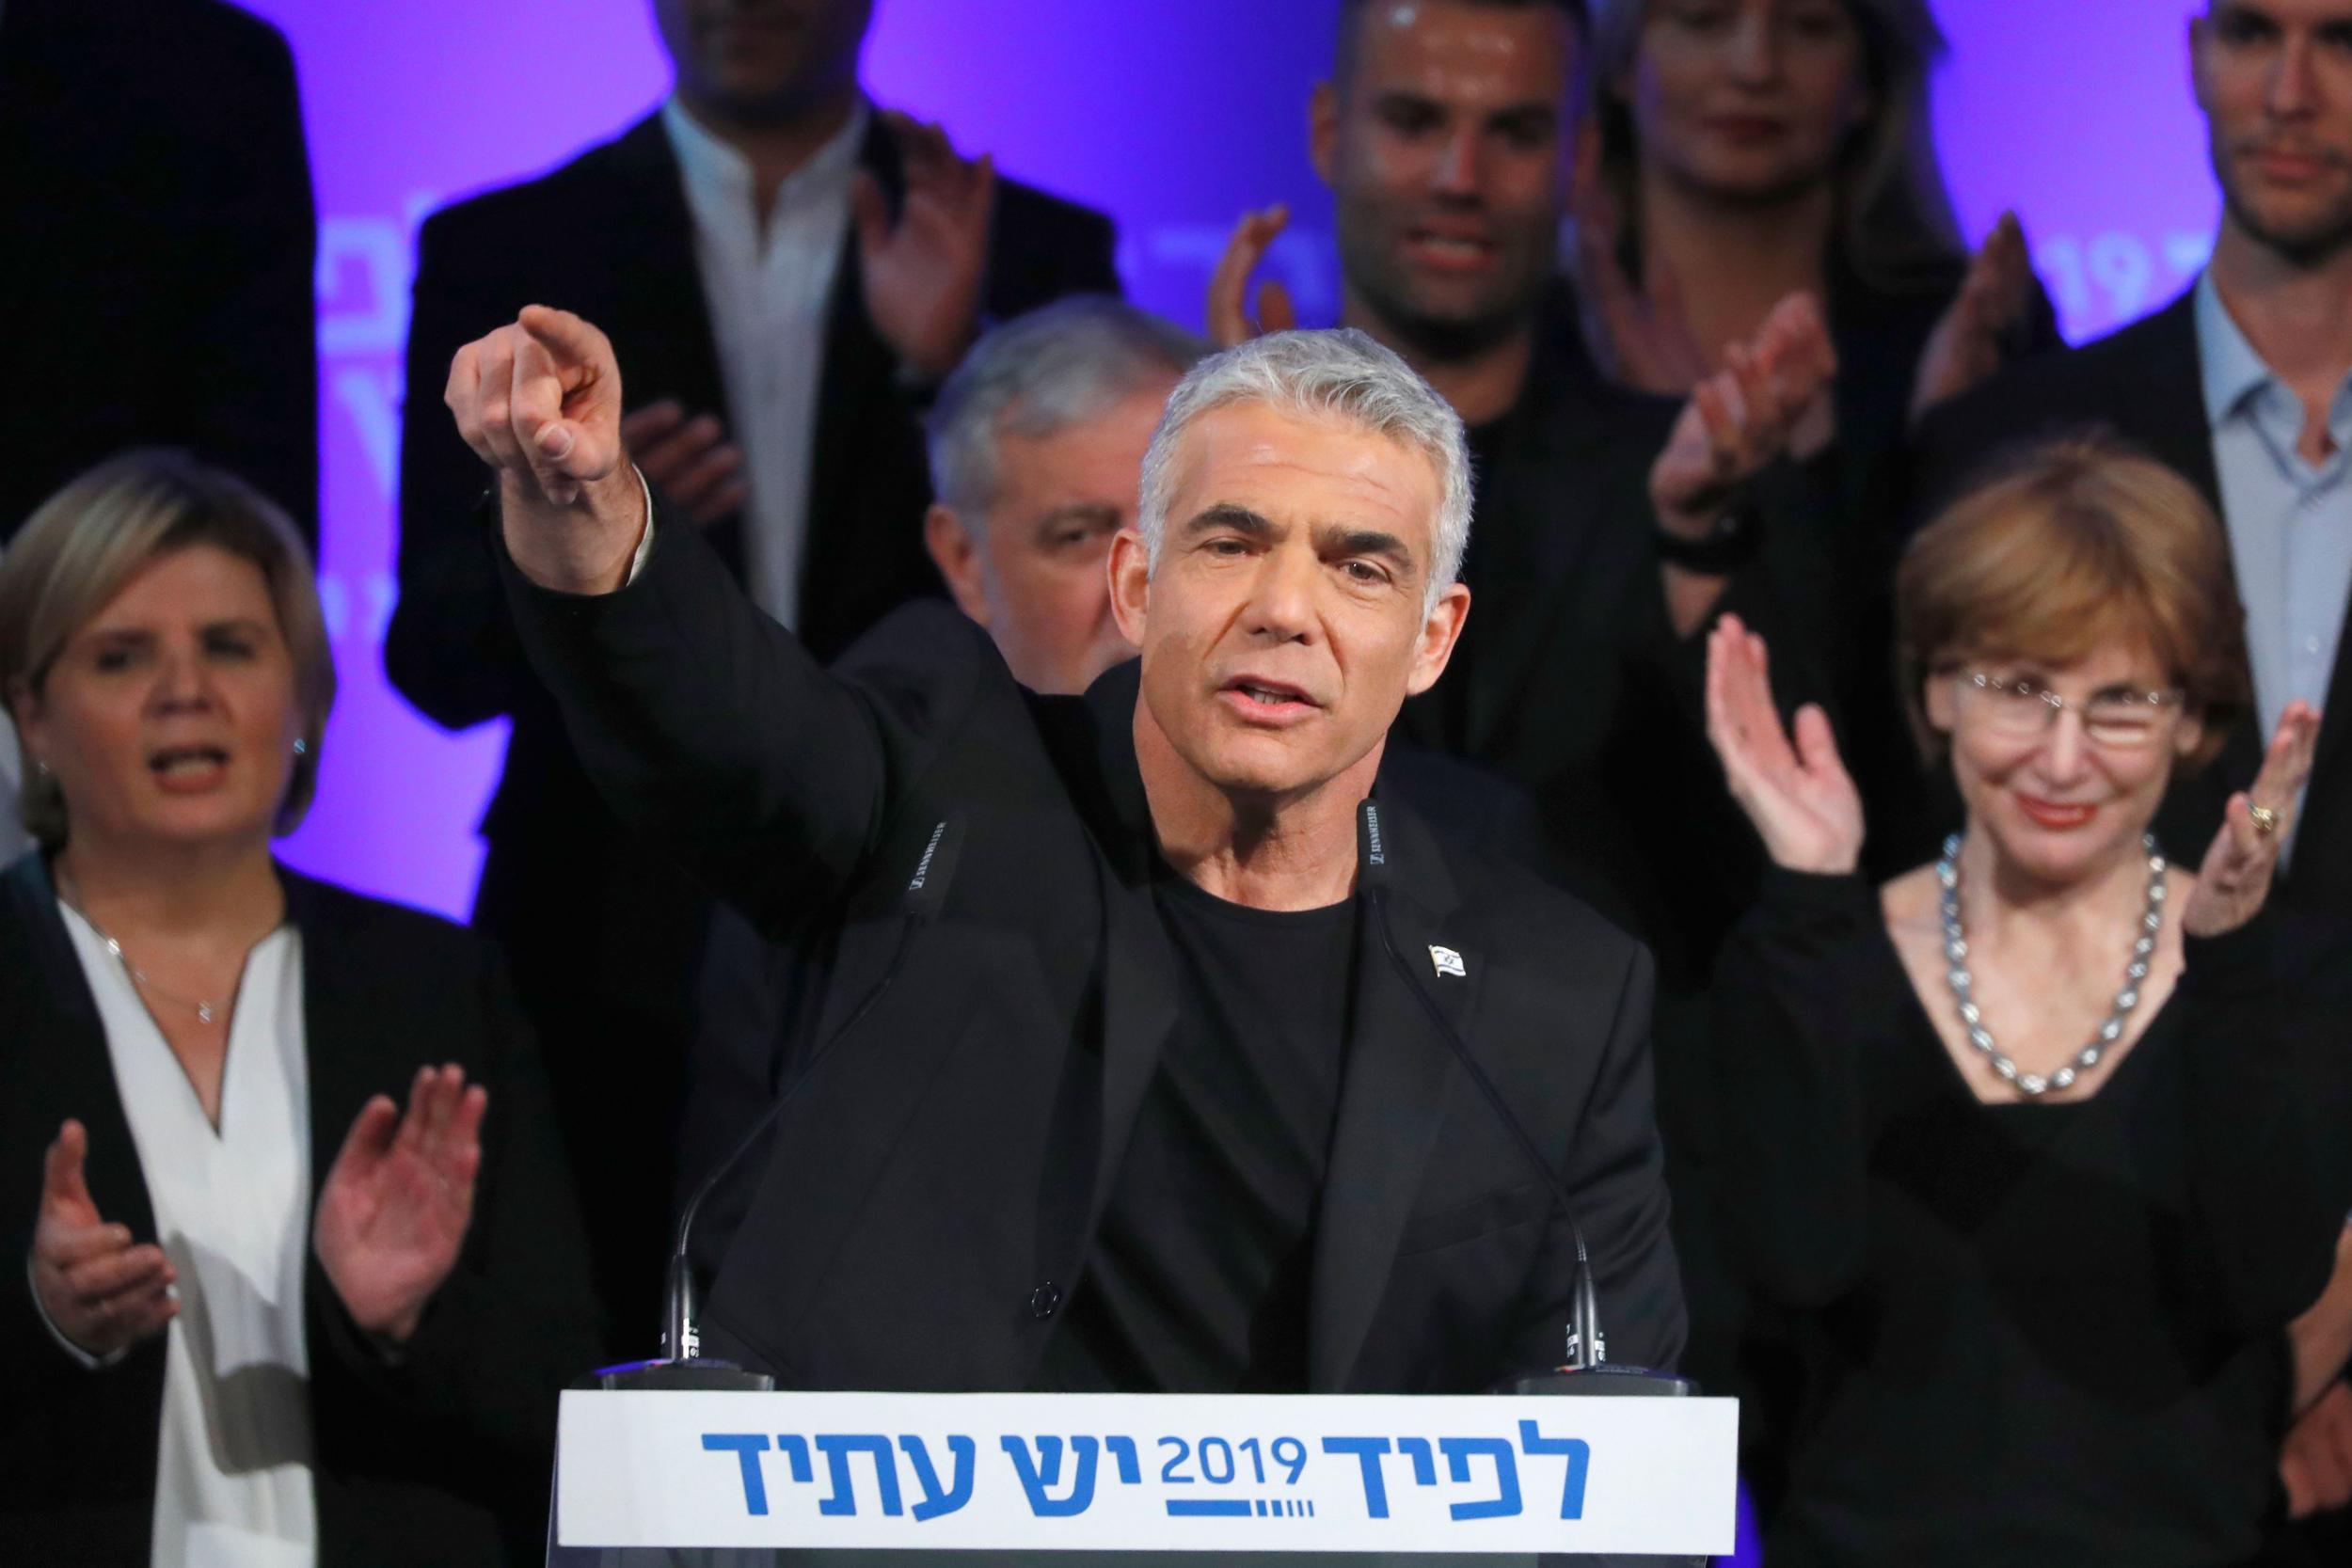 Yair Lapid, chairman of Israel’s Yesh Atid party, presents his electoral list this week (AFP/Getty)